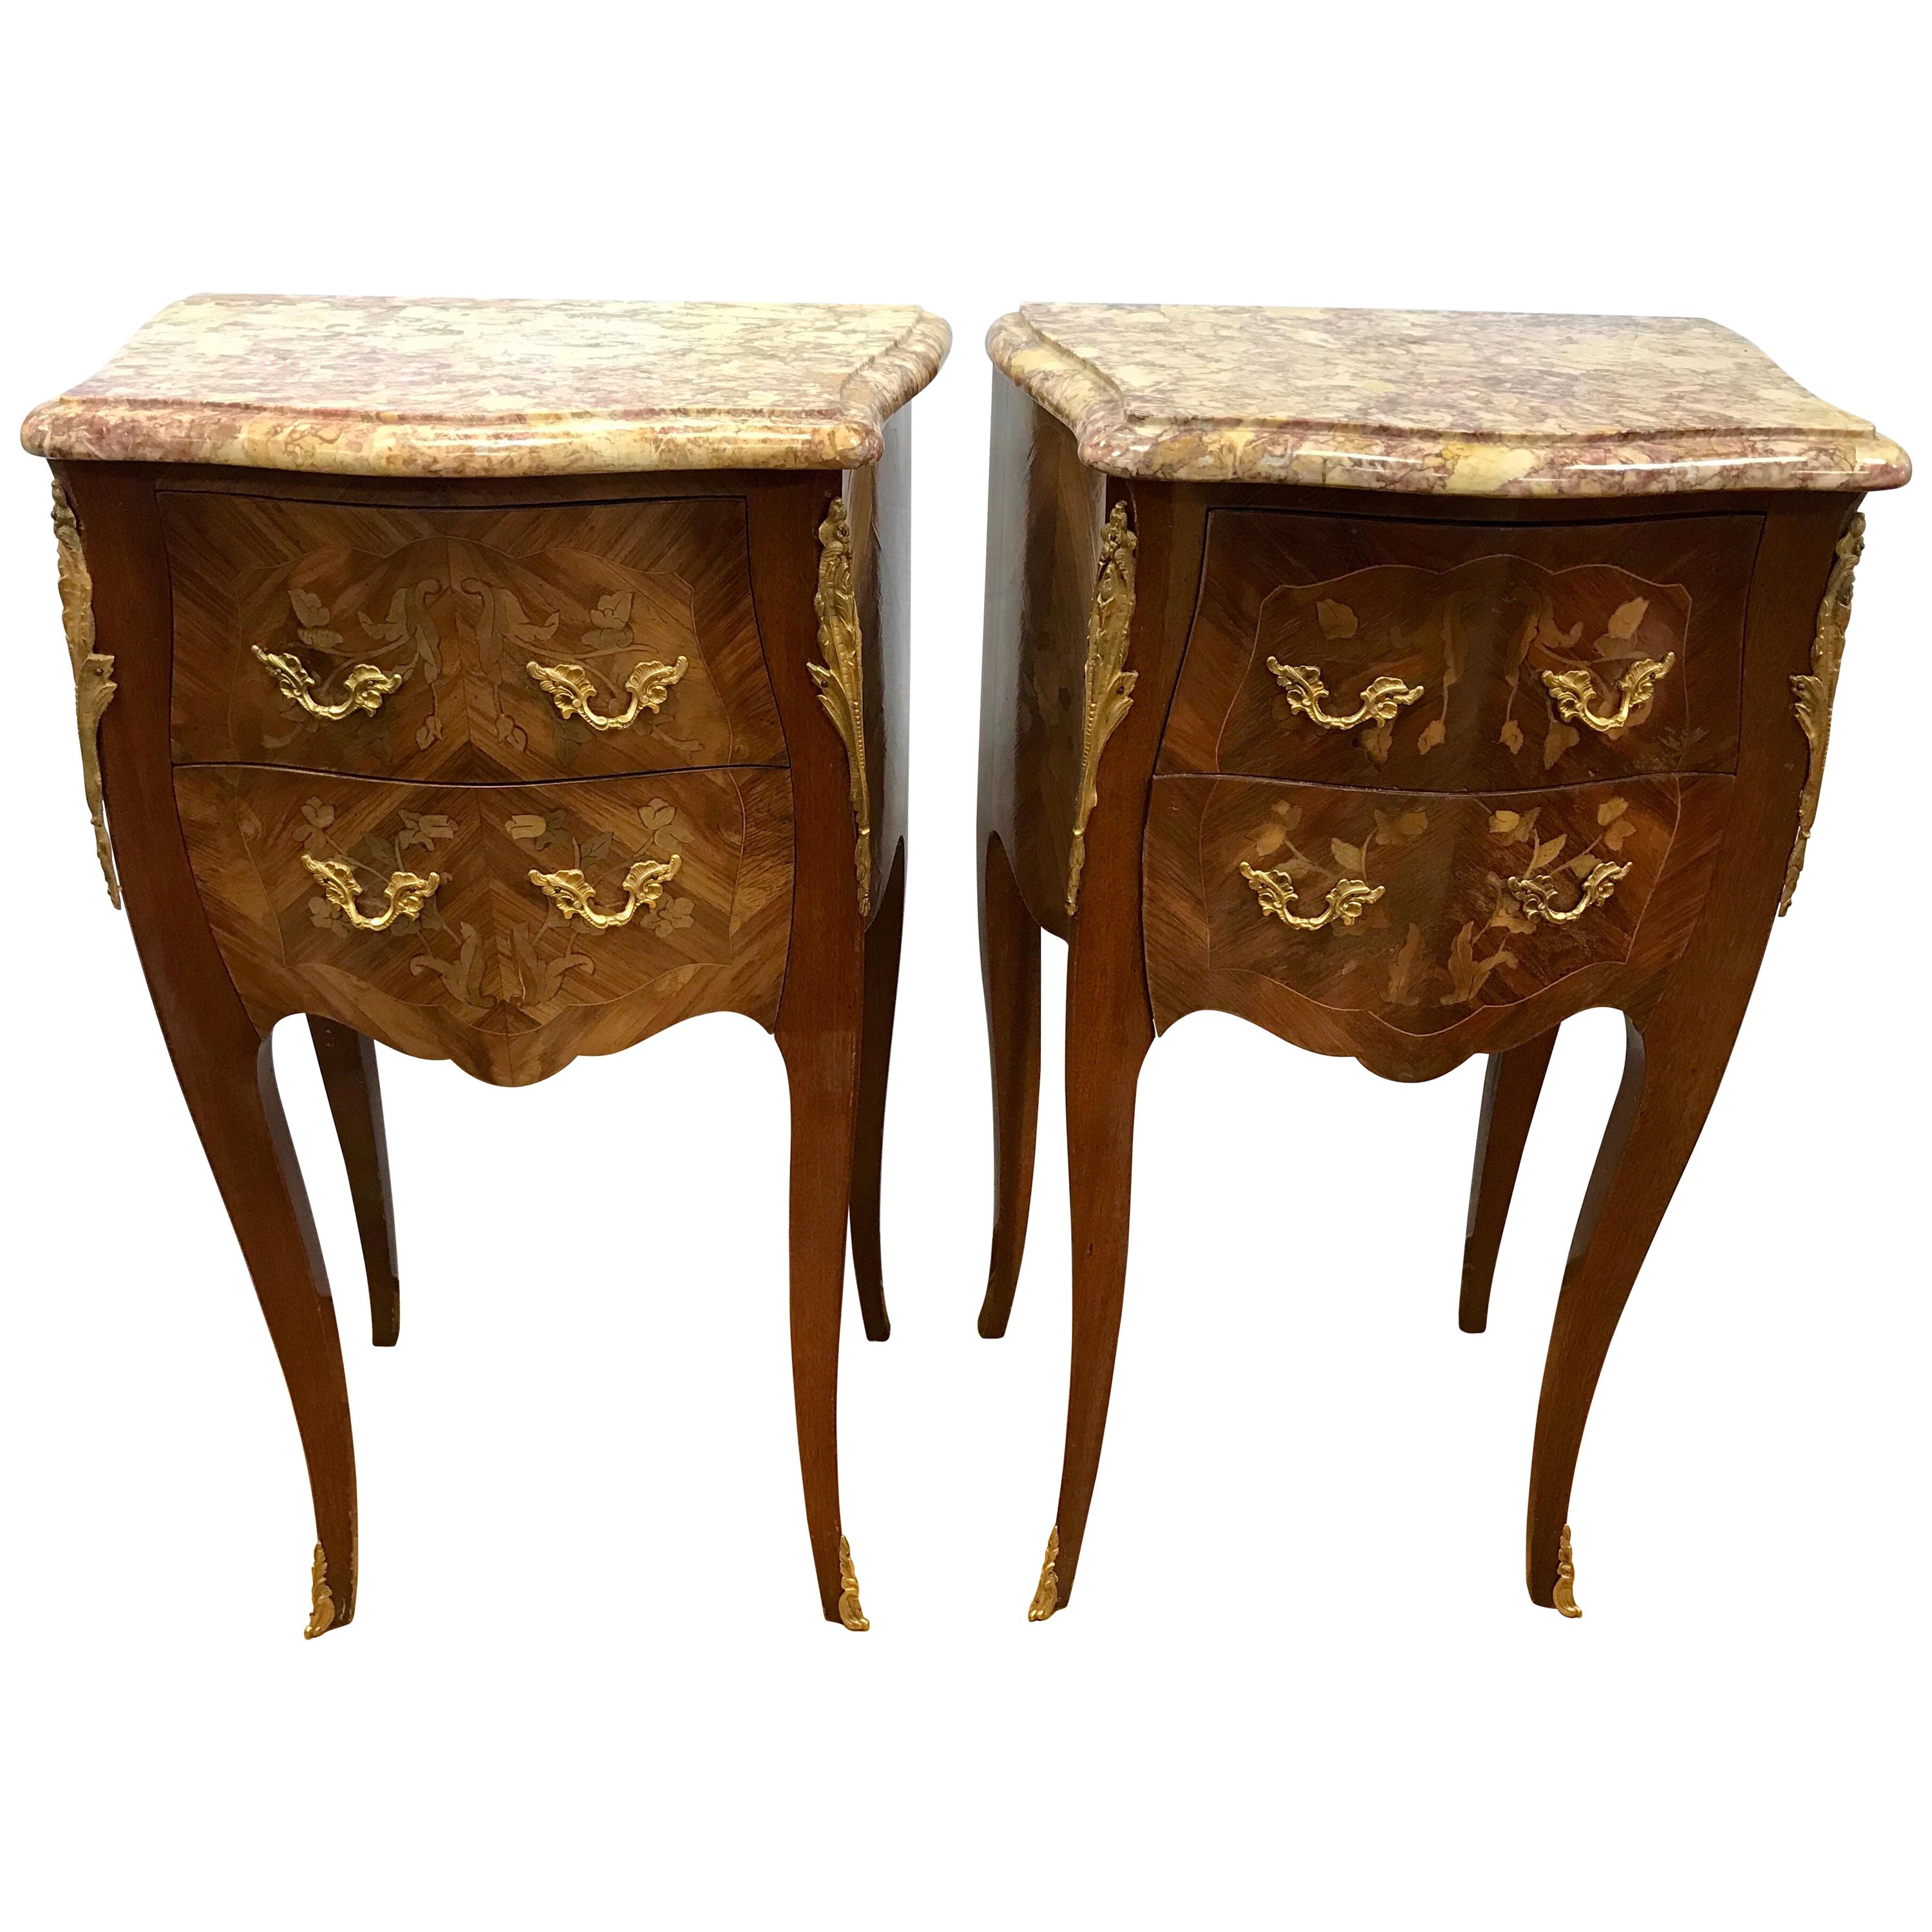 Pair of French Louis XVI Marble-Top Bronze-Mounted Bedside Tables or Nightstands